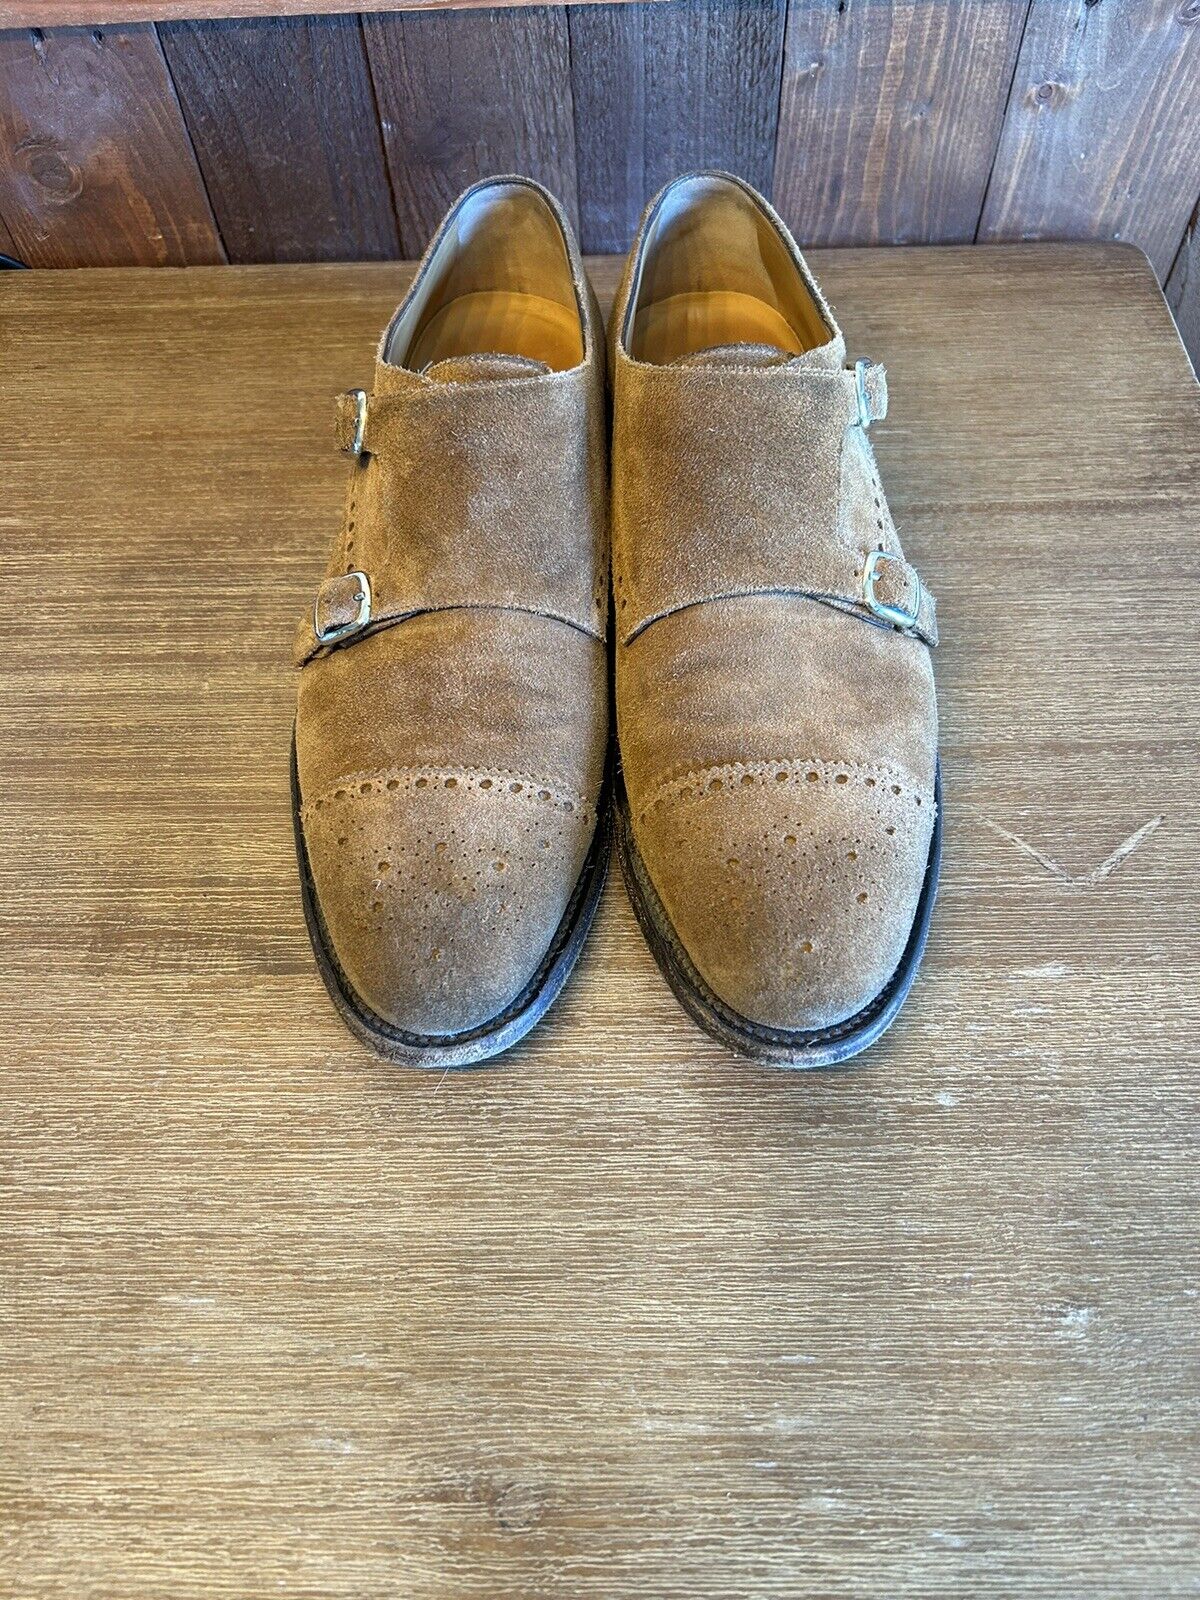 O’keefe Brown Suede Double Monk Strap Size UK 9.5 US 10.5 Hand Crafted In Italy